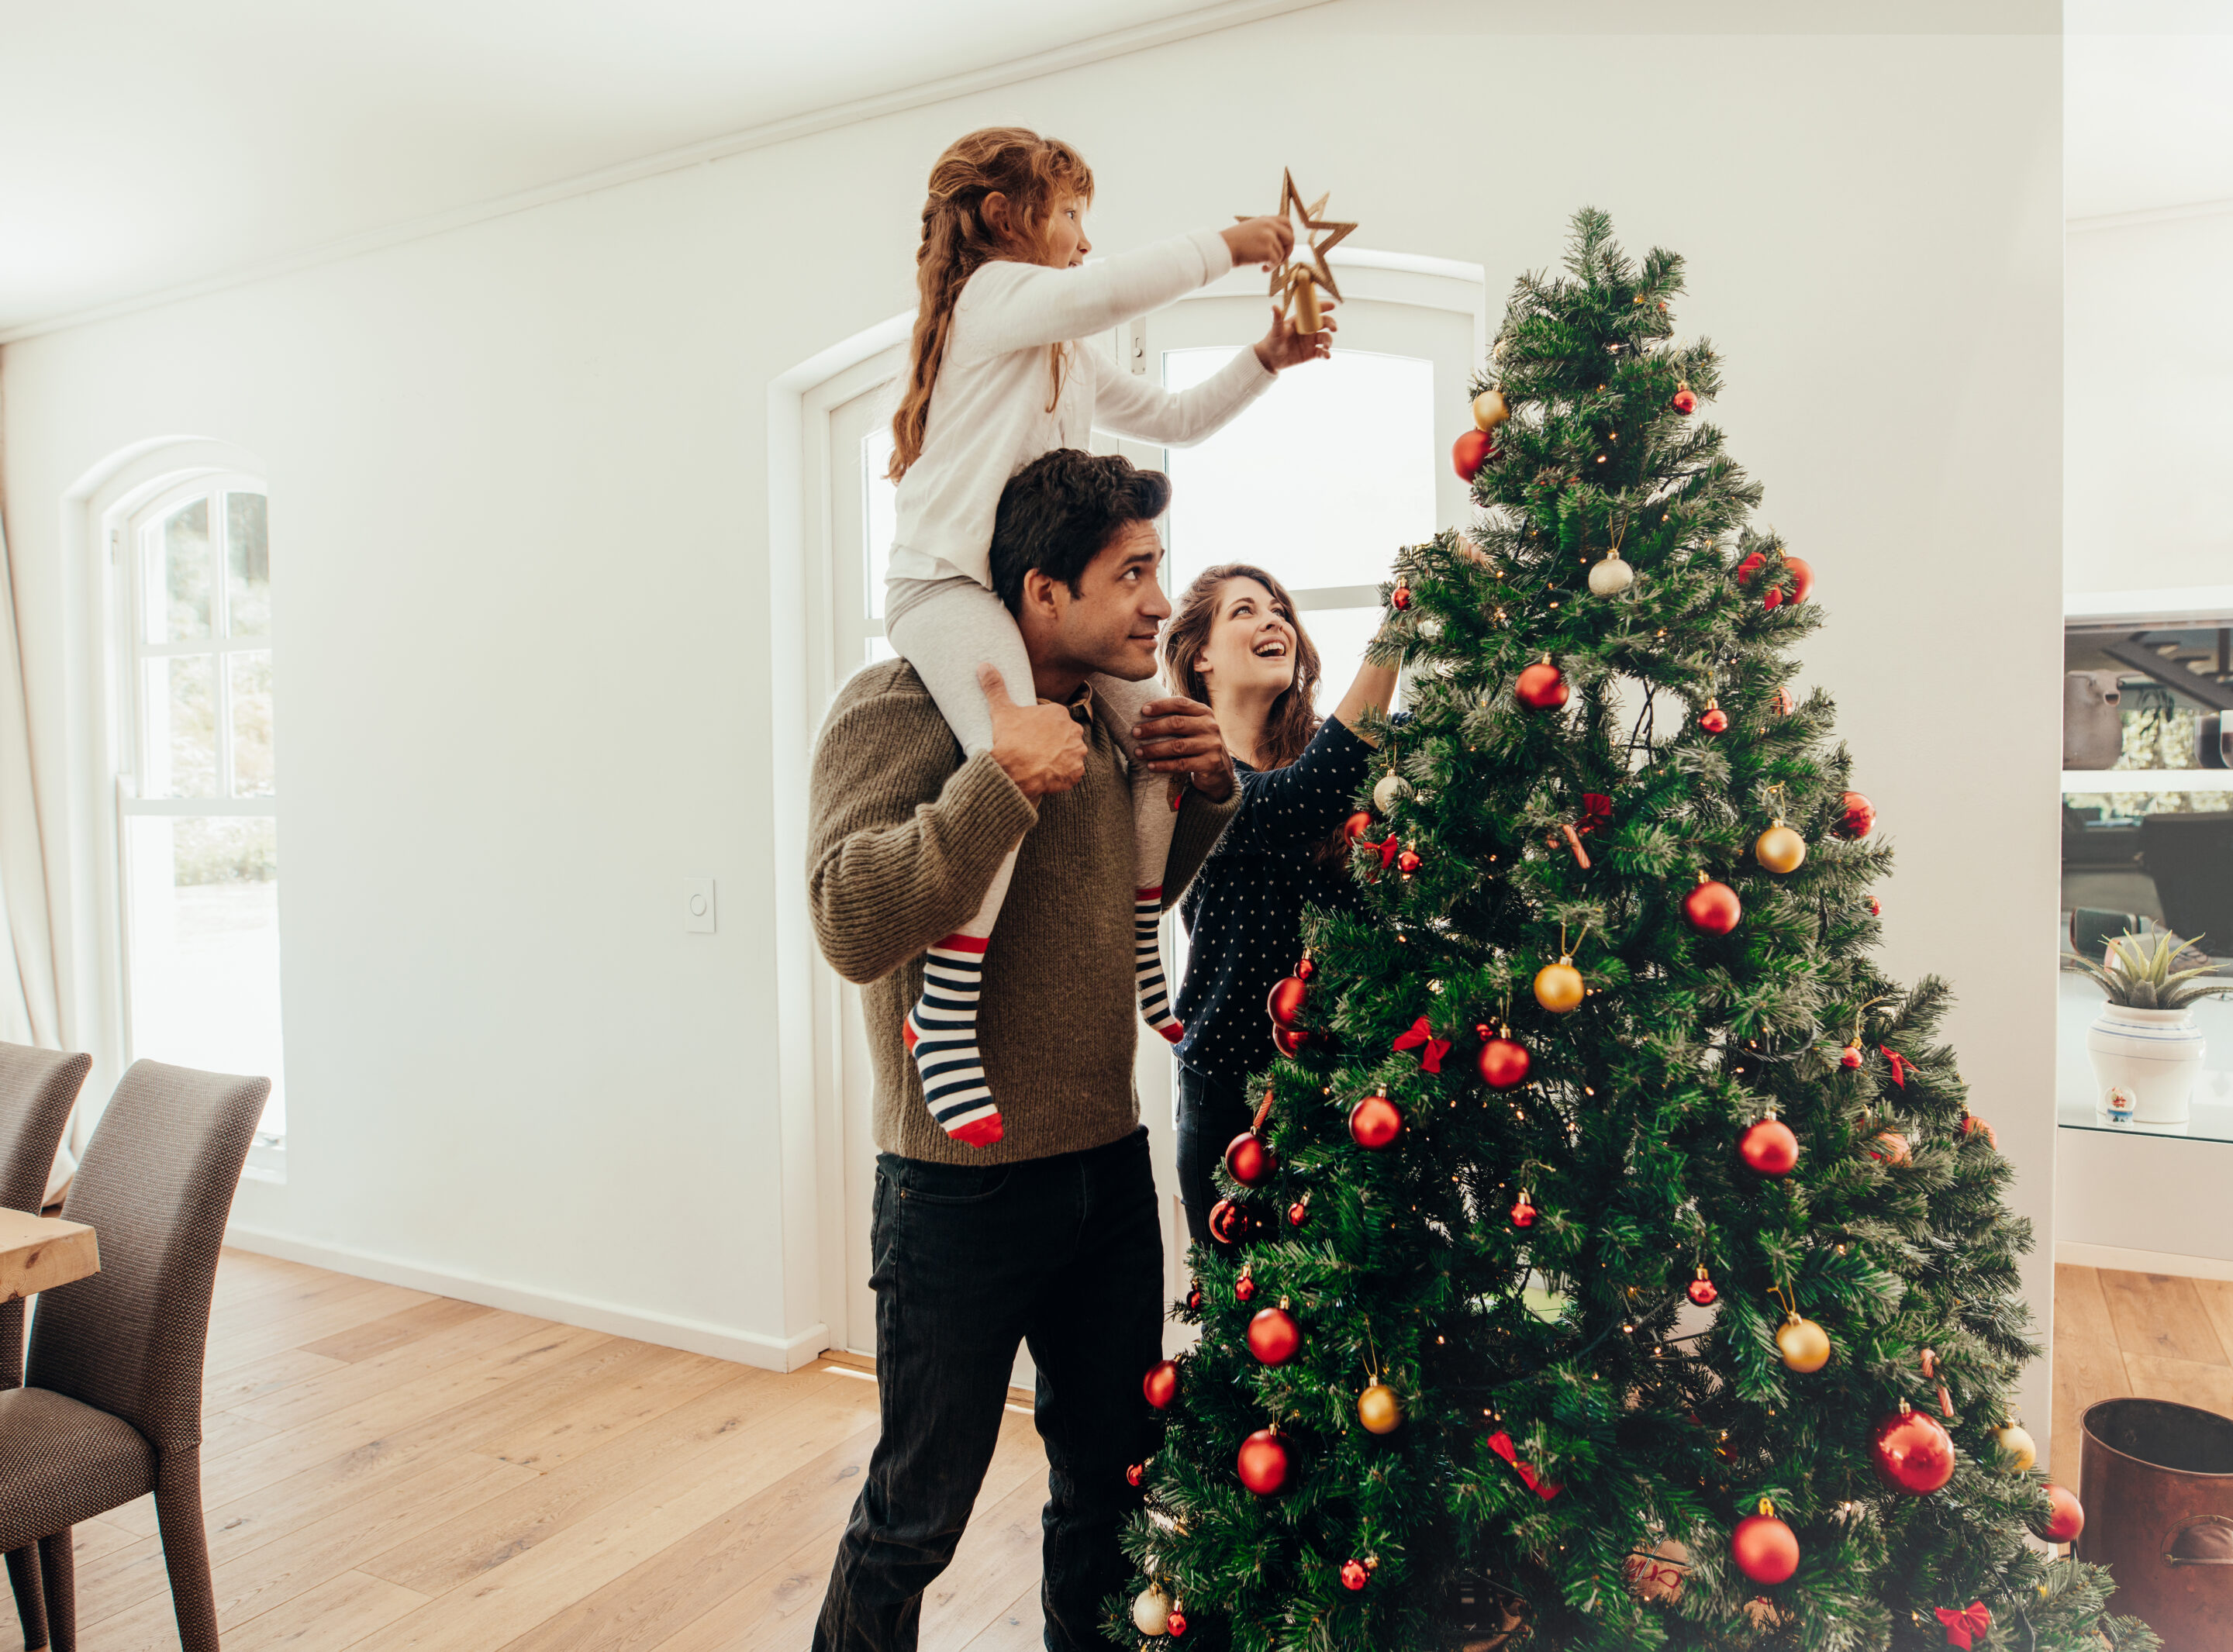 8 Tips for a Stress-Free Christmas